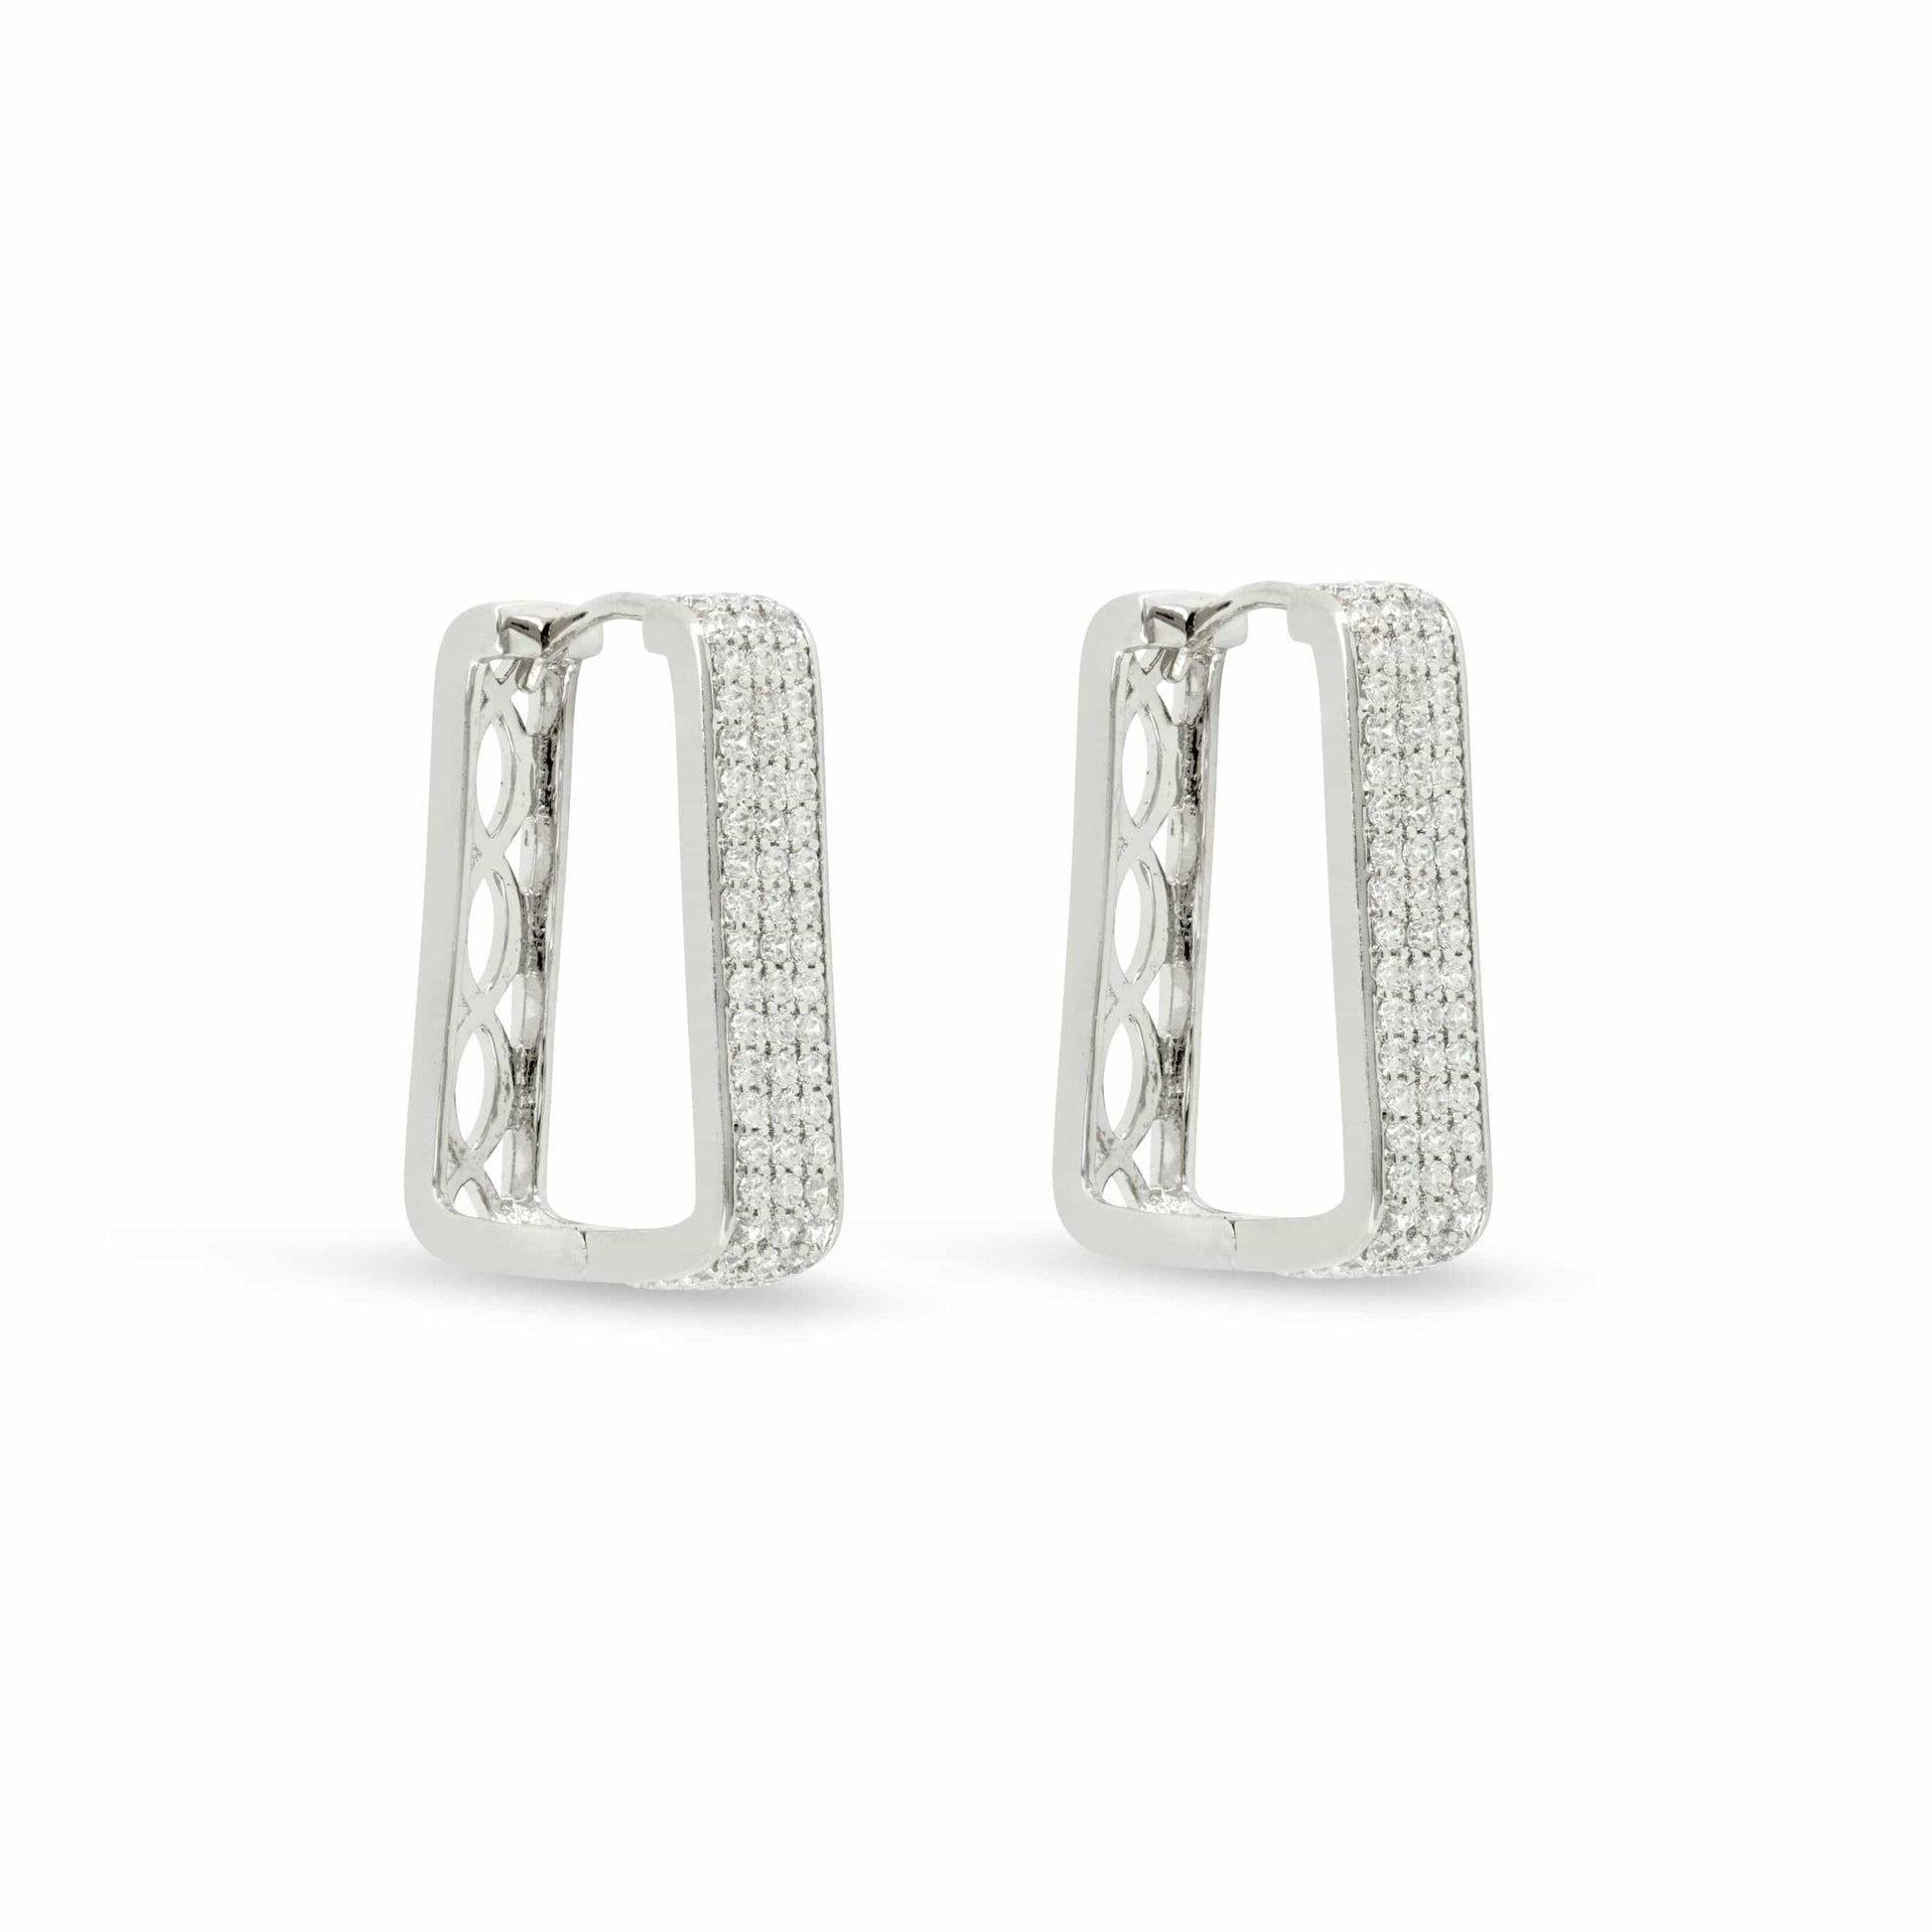 Platinum Hoop Earrings with Cubic Zirconia Crystal Inlay - Love & Lilly Jewellery